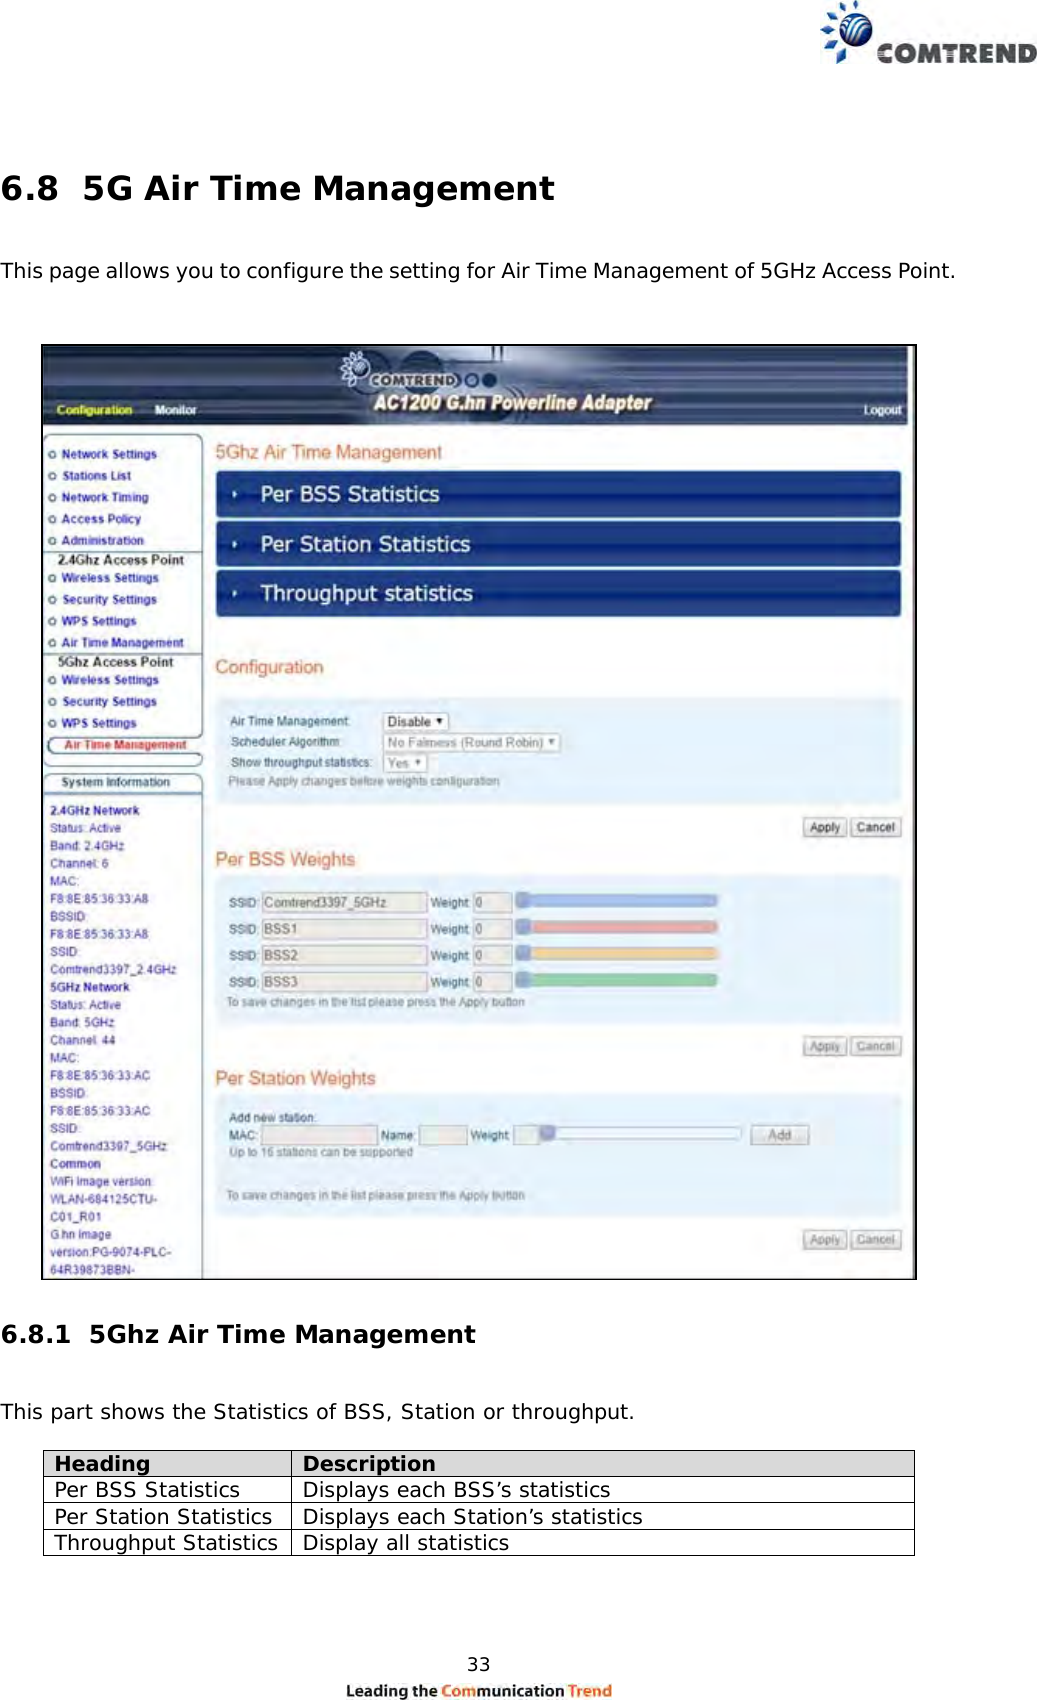  33   6.8  5G Air Time Management  This page allows you to configure the setting for Air Time Management of 5GHz Access Point.    6.8.1  5Ghz Air Time Management  This part shows the Statistics of BSS, Station or throughput.  Heading  Description Per BSS Statistics  Displays each BSS’s statistics Per Station Statistics  Displays each Station’s statistics Throughput Statistics  Display all statistics   